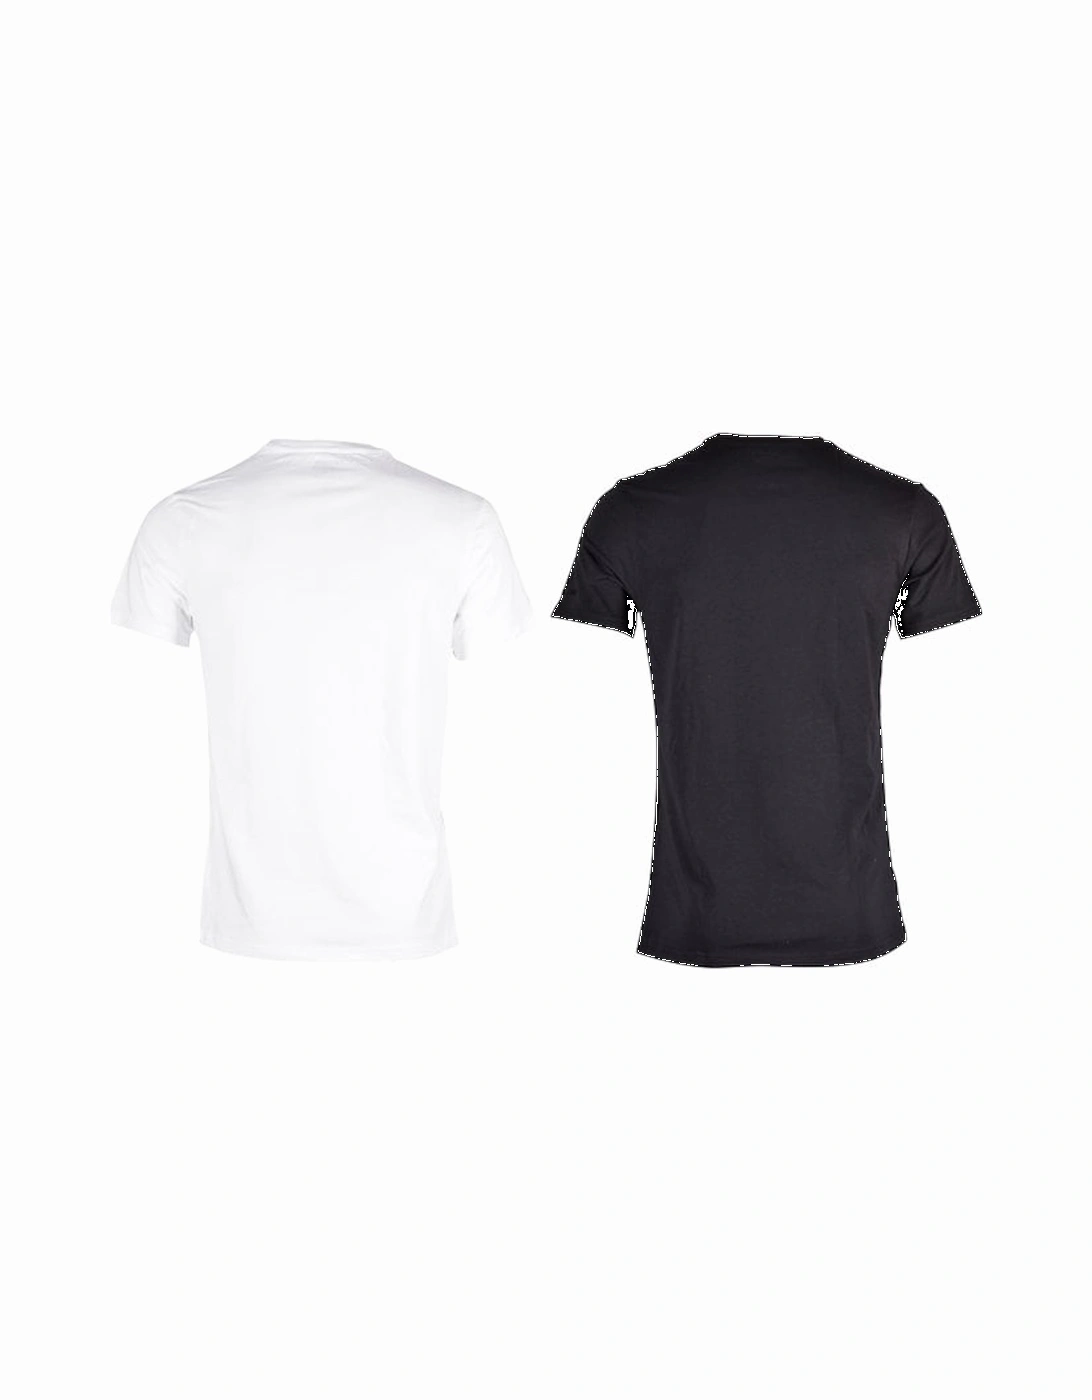 2-Pack Crew-Neck T-Shirts in Slim-Fit, Black/White